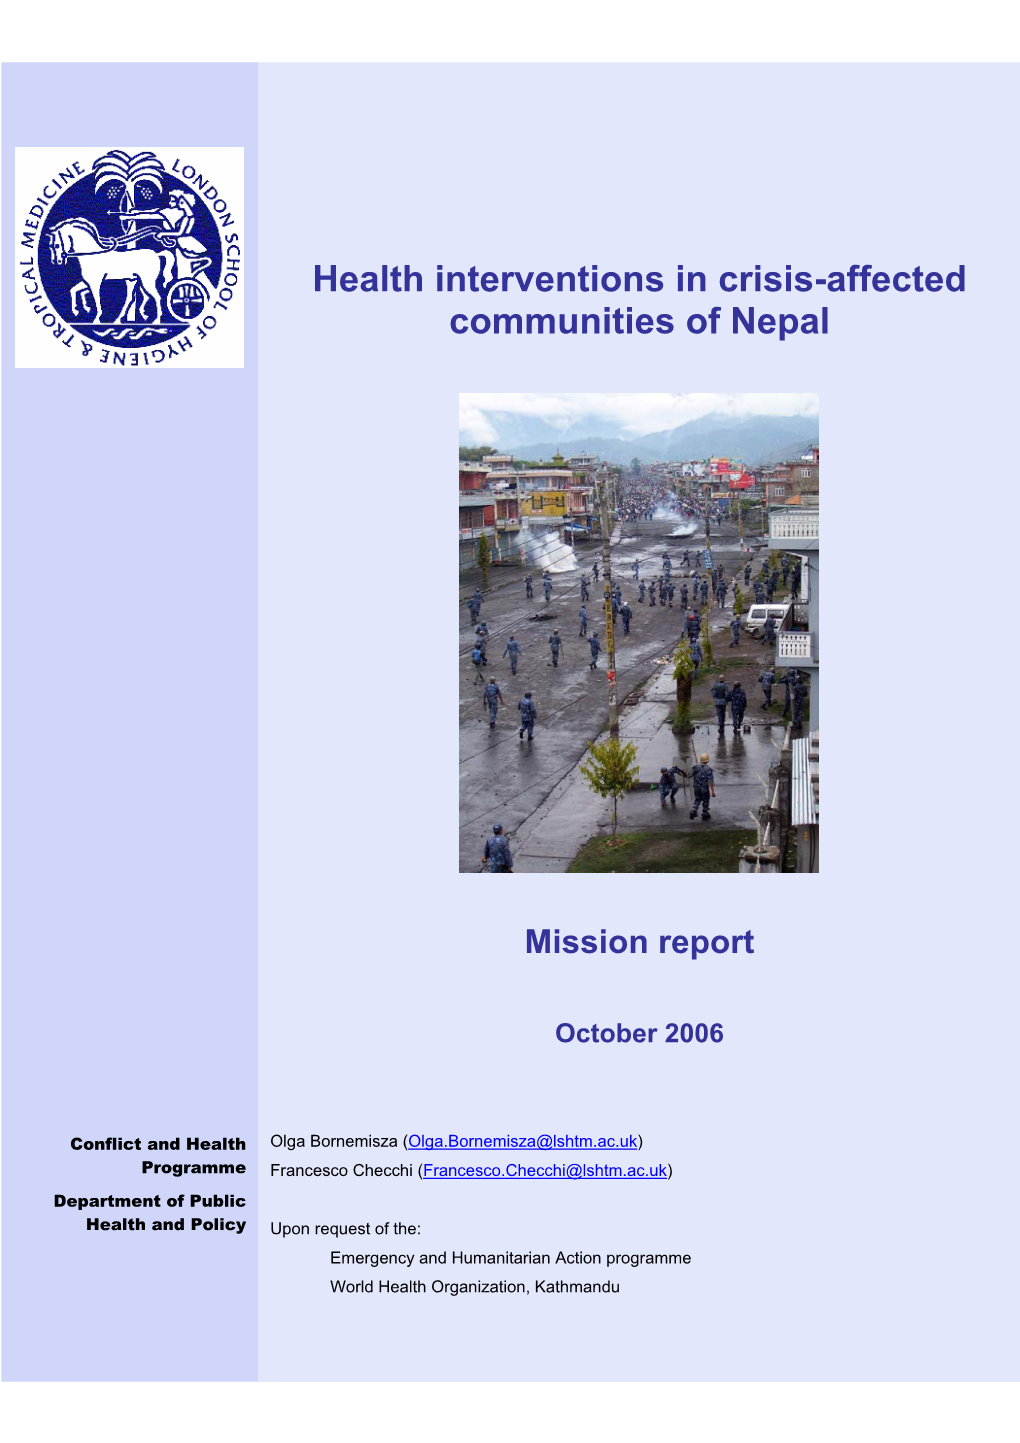 Health Interventions in Crisis-Affected Communities of Nepal